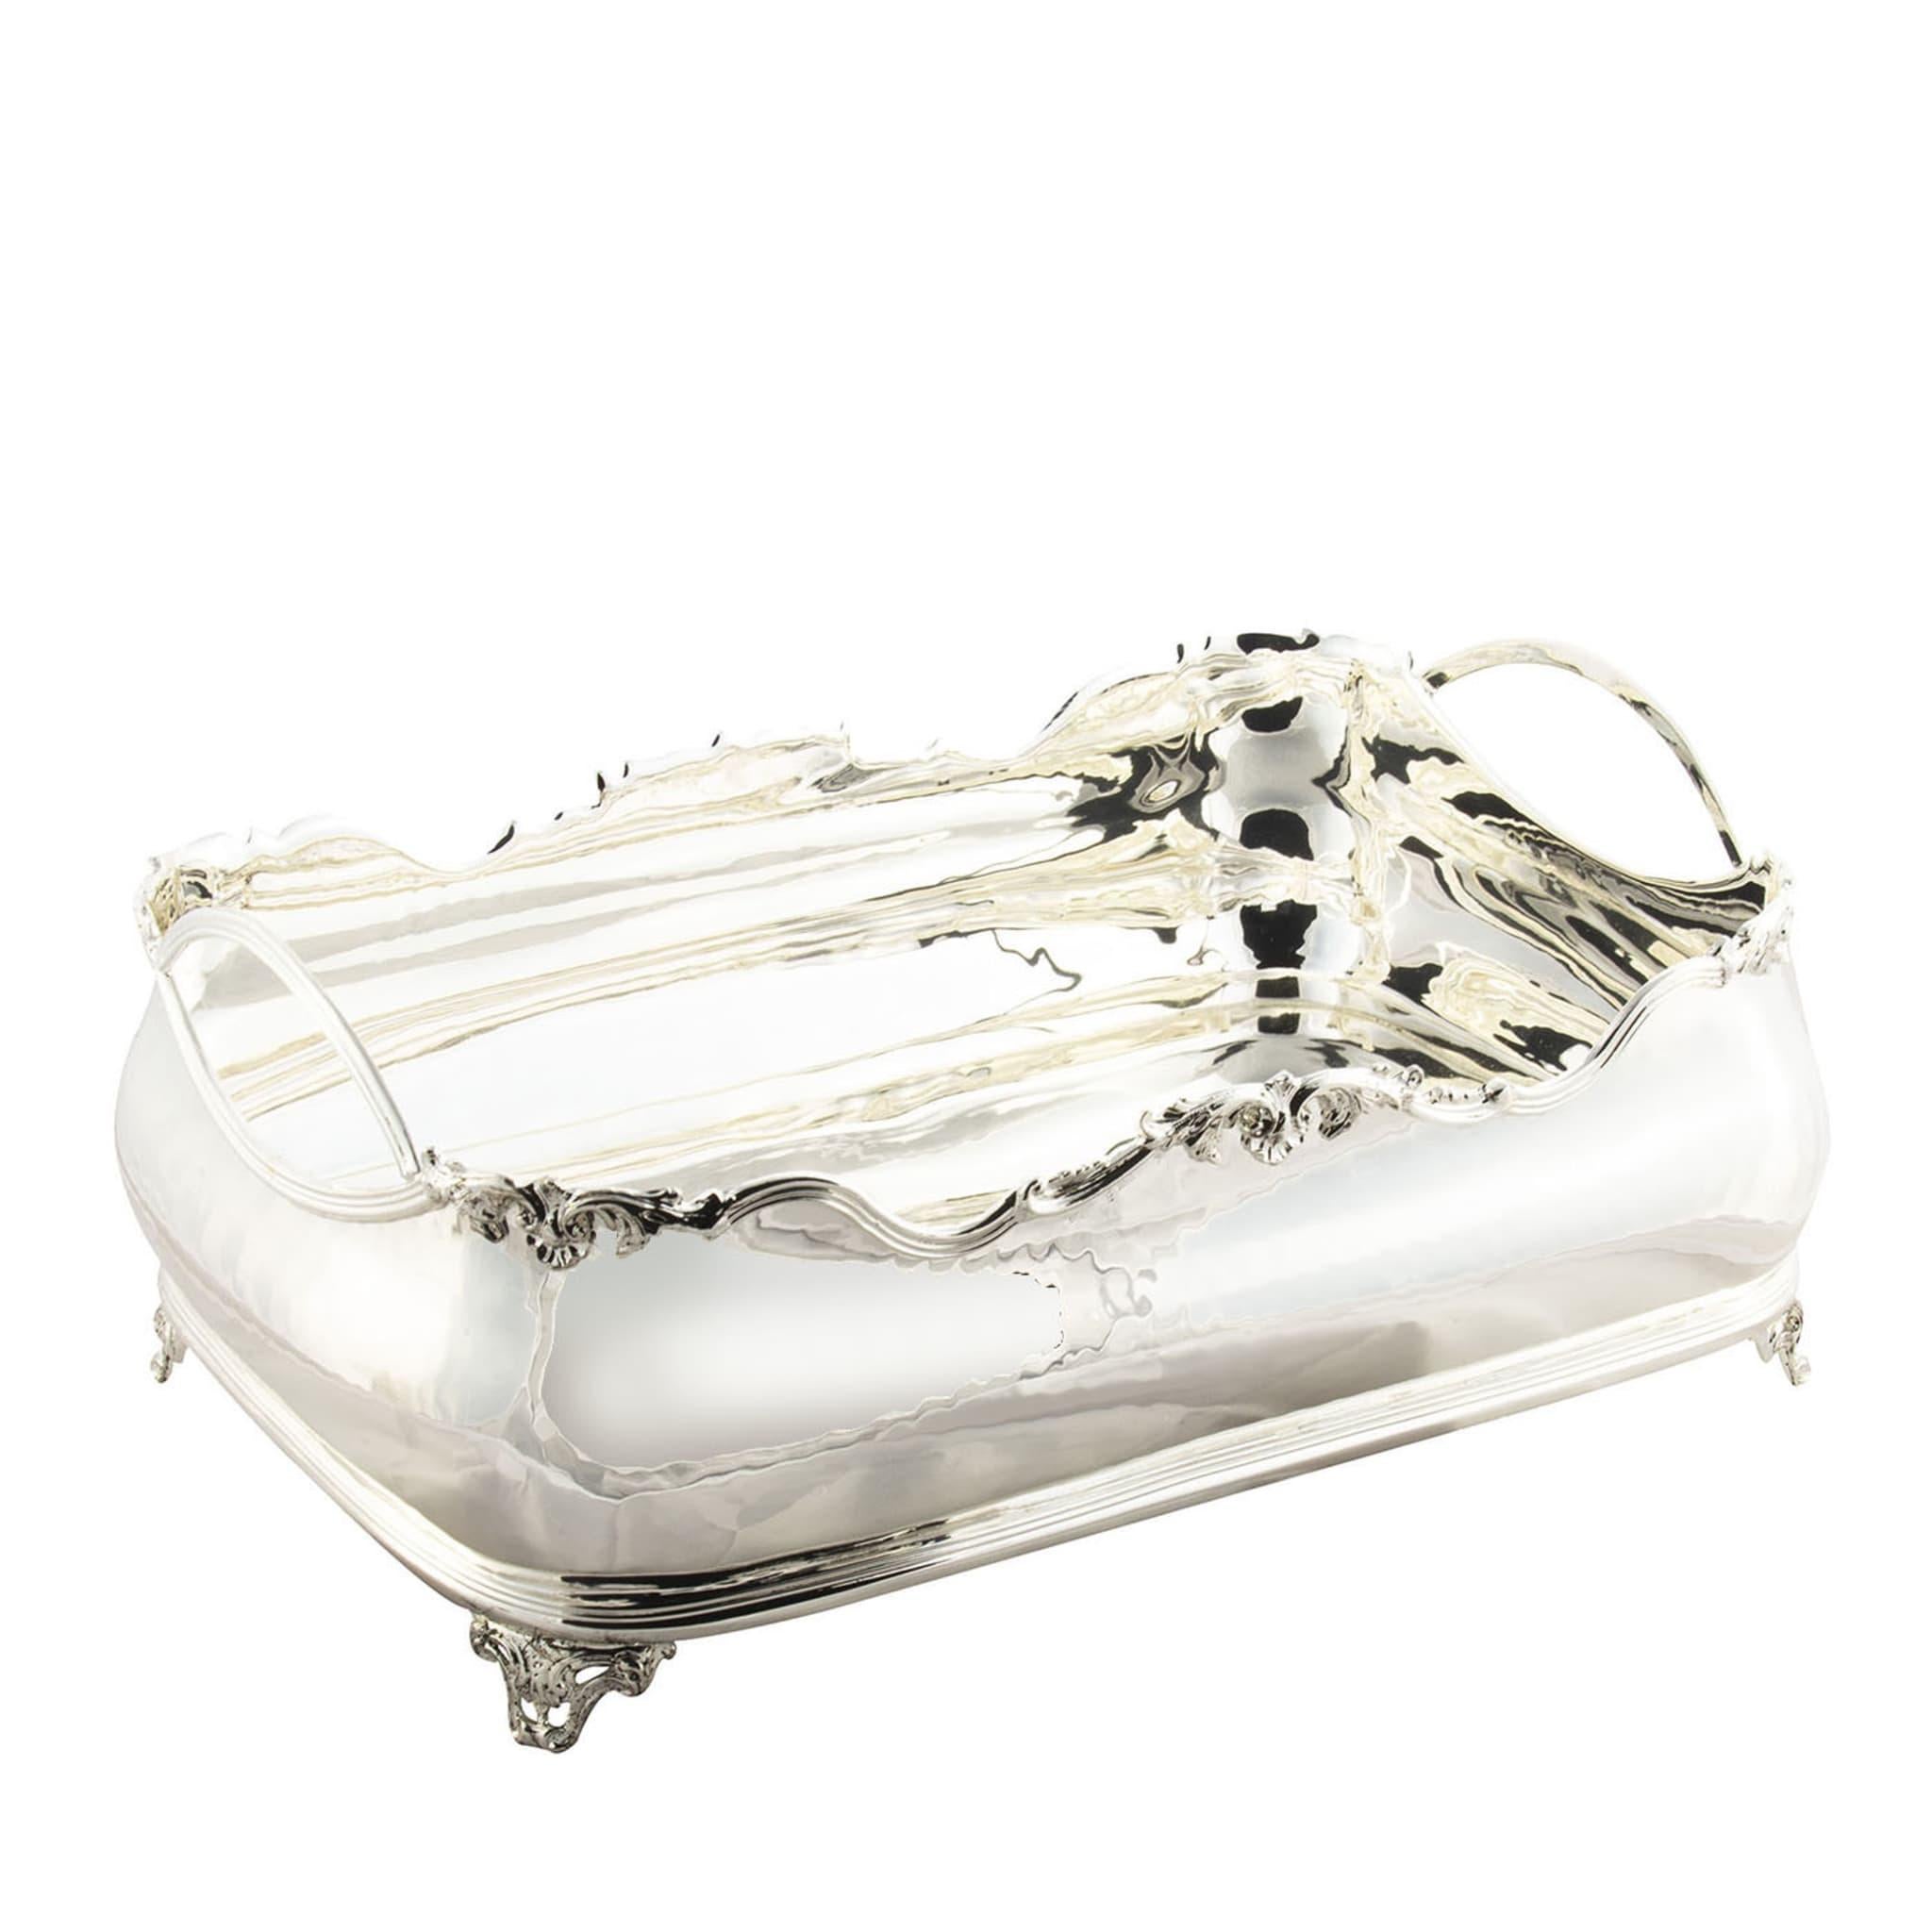 Classic-Style Rectangular Footed Silver Centerpiece Bowl For Sale